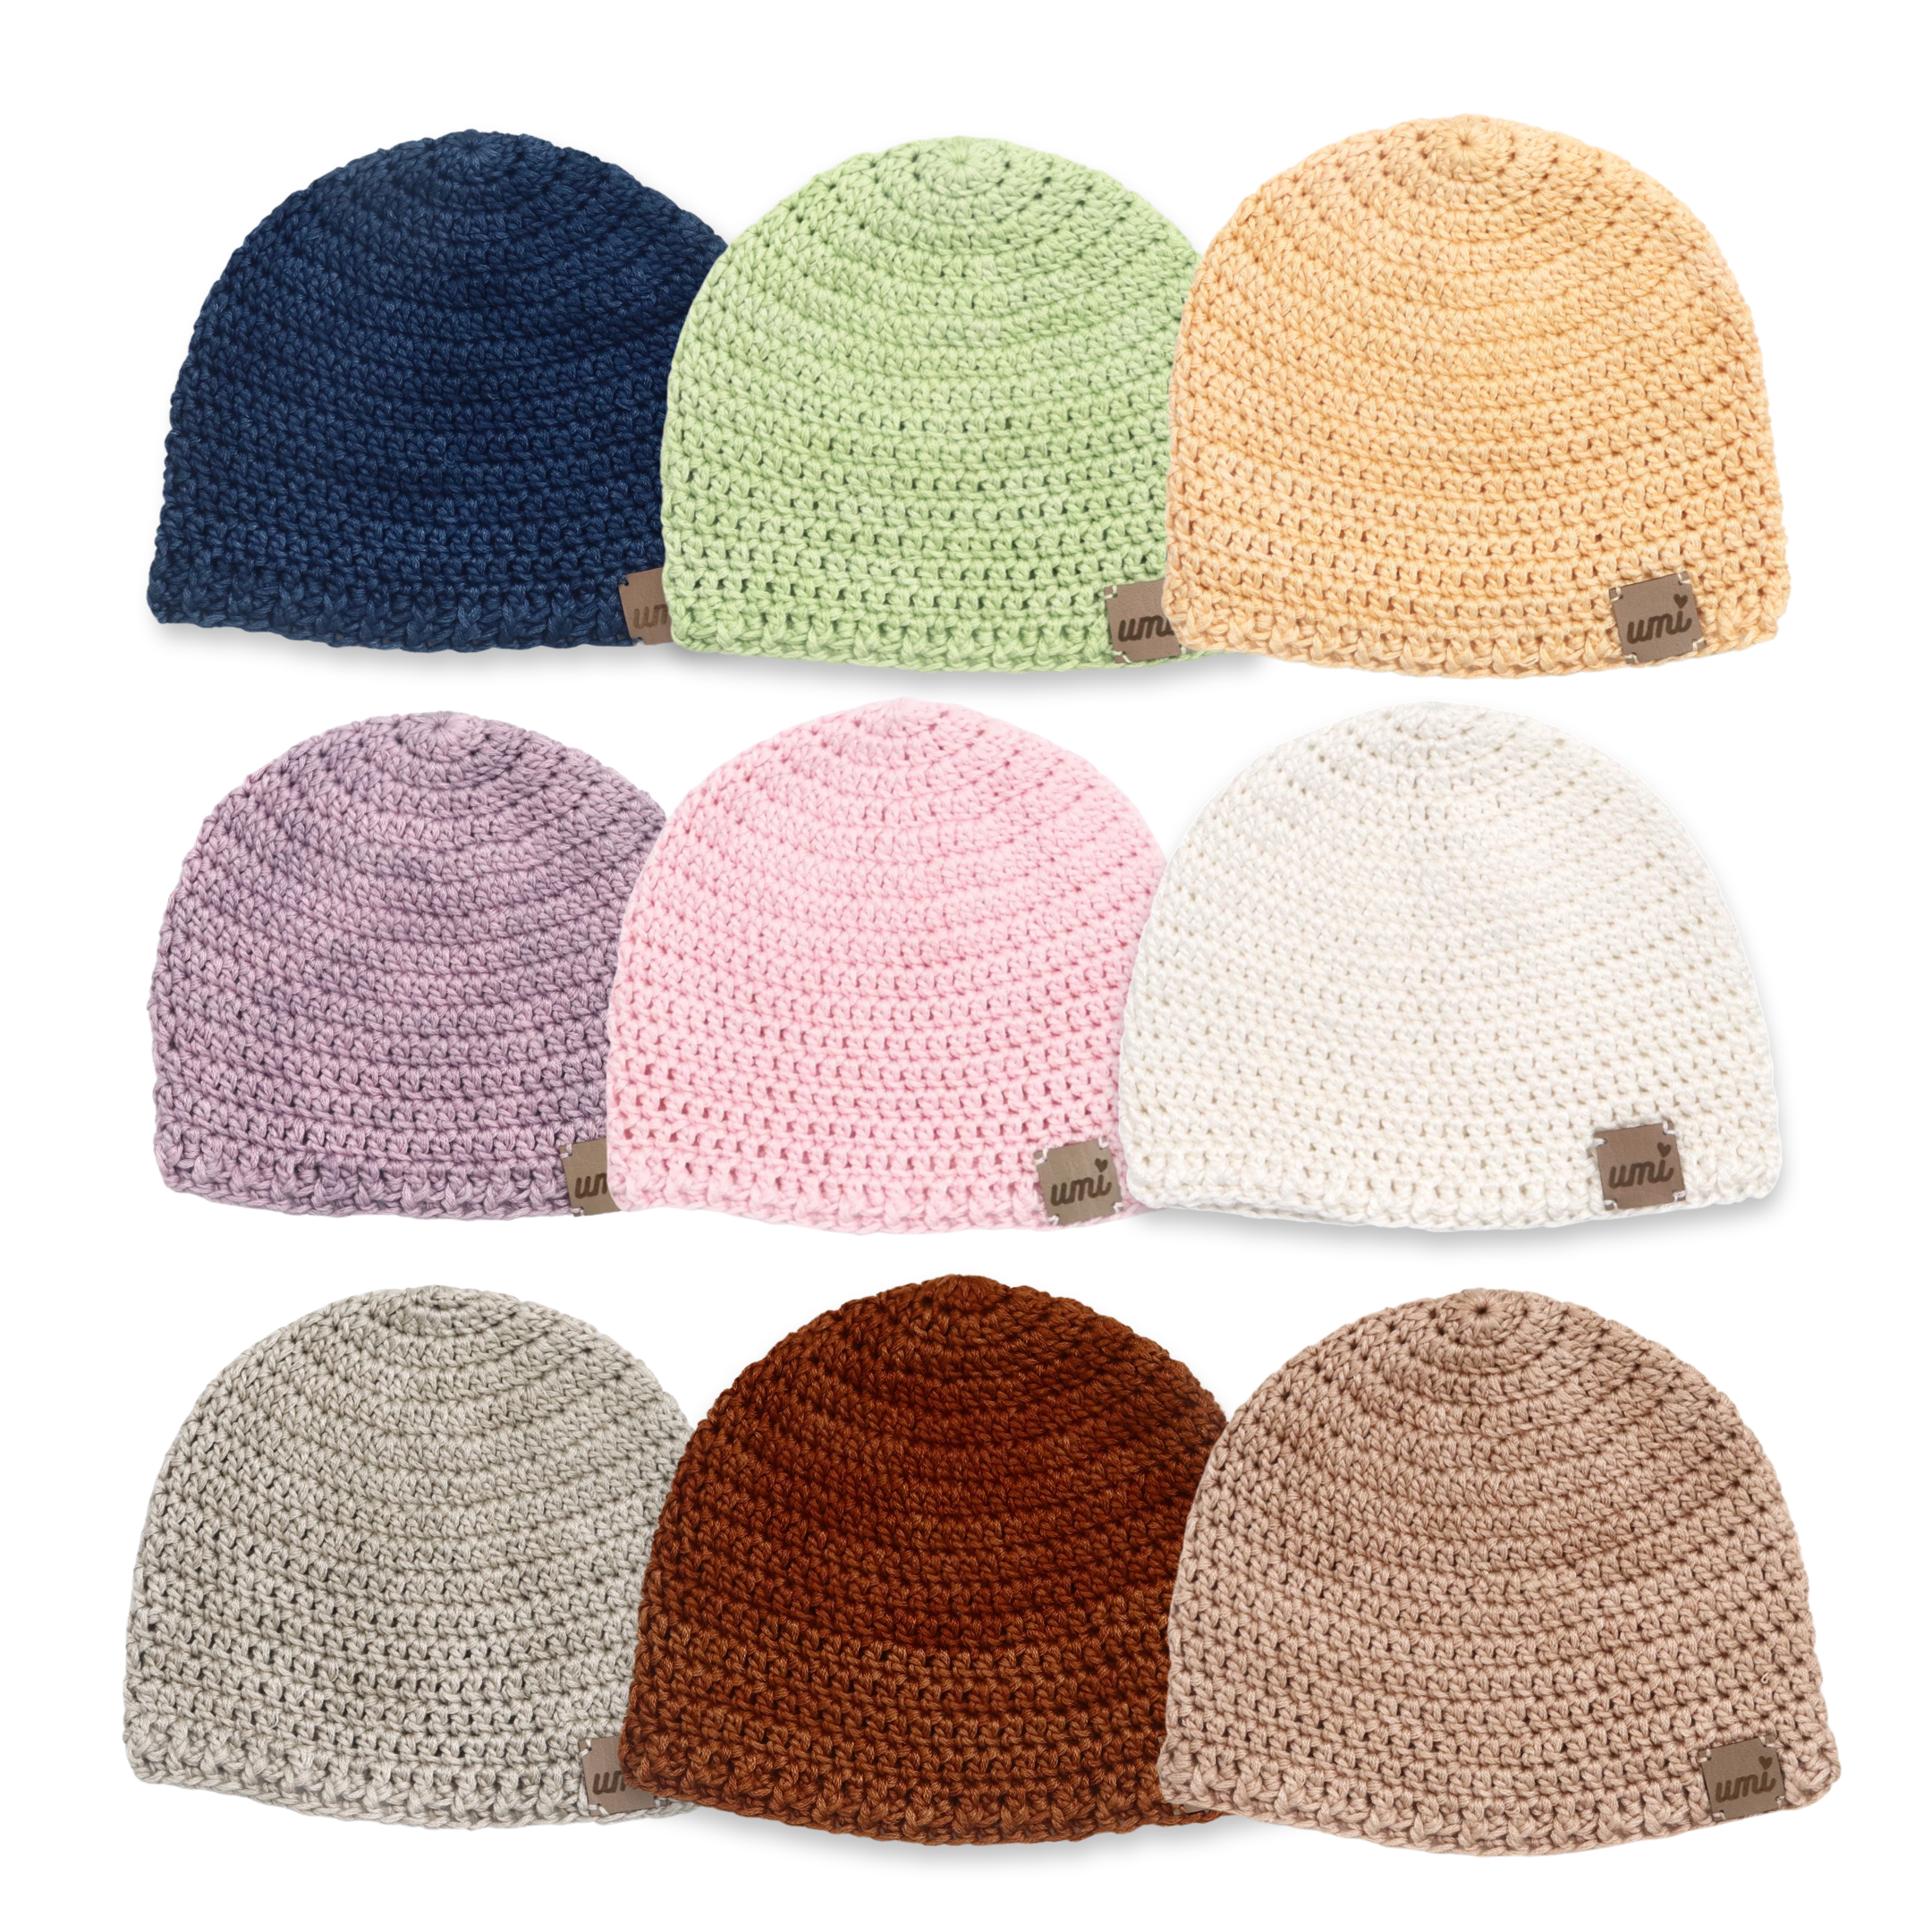 Umi Knitted Beanies (0-3 Months) - Bubbadue